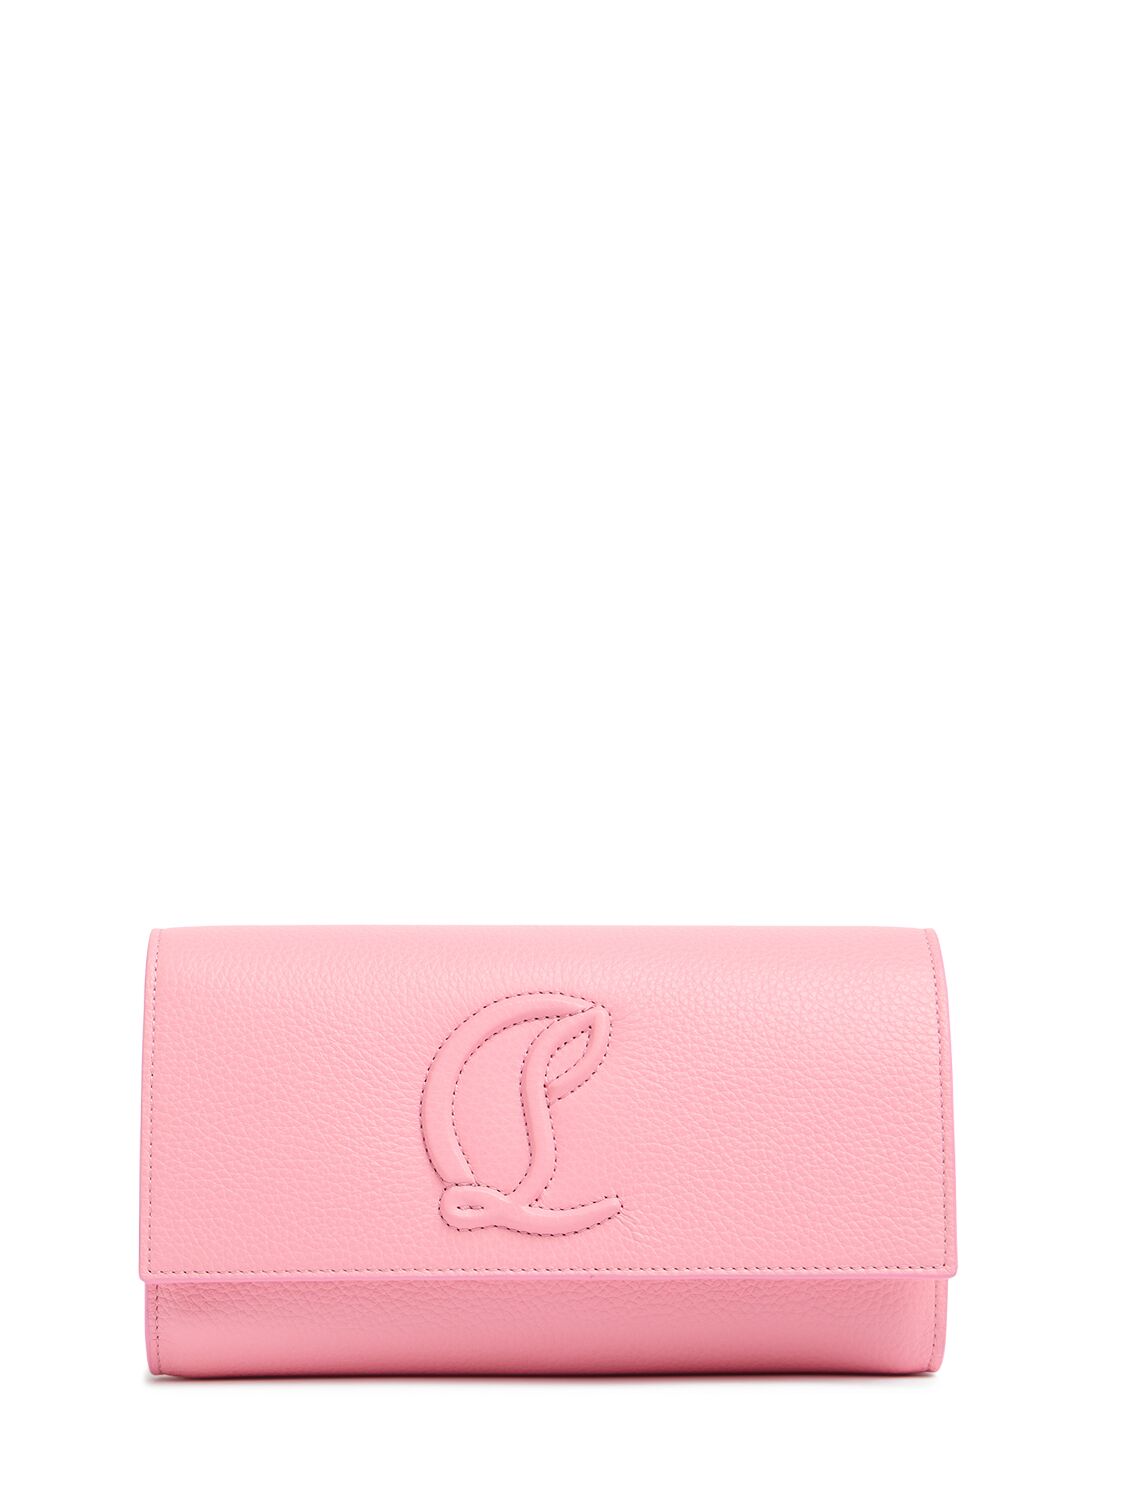 Christian Louboutin By My Side Leather Wallet W/ Chain In Calipso